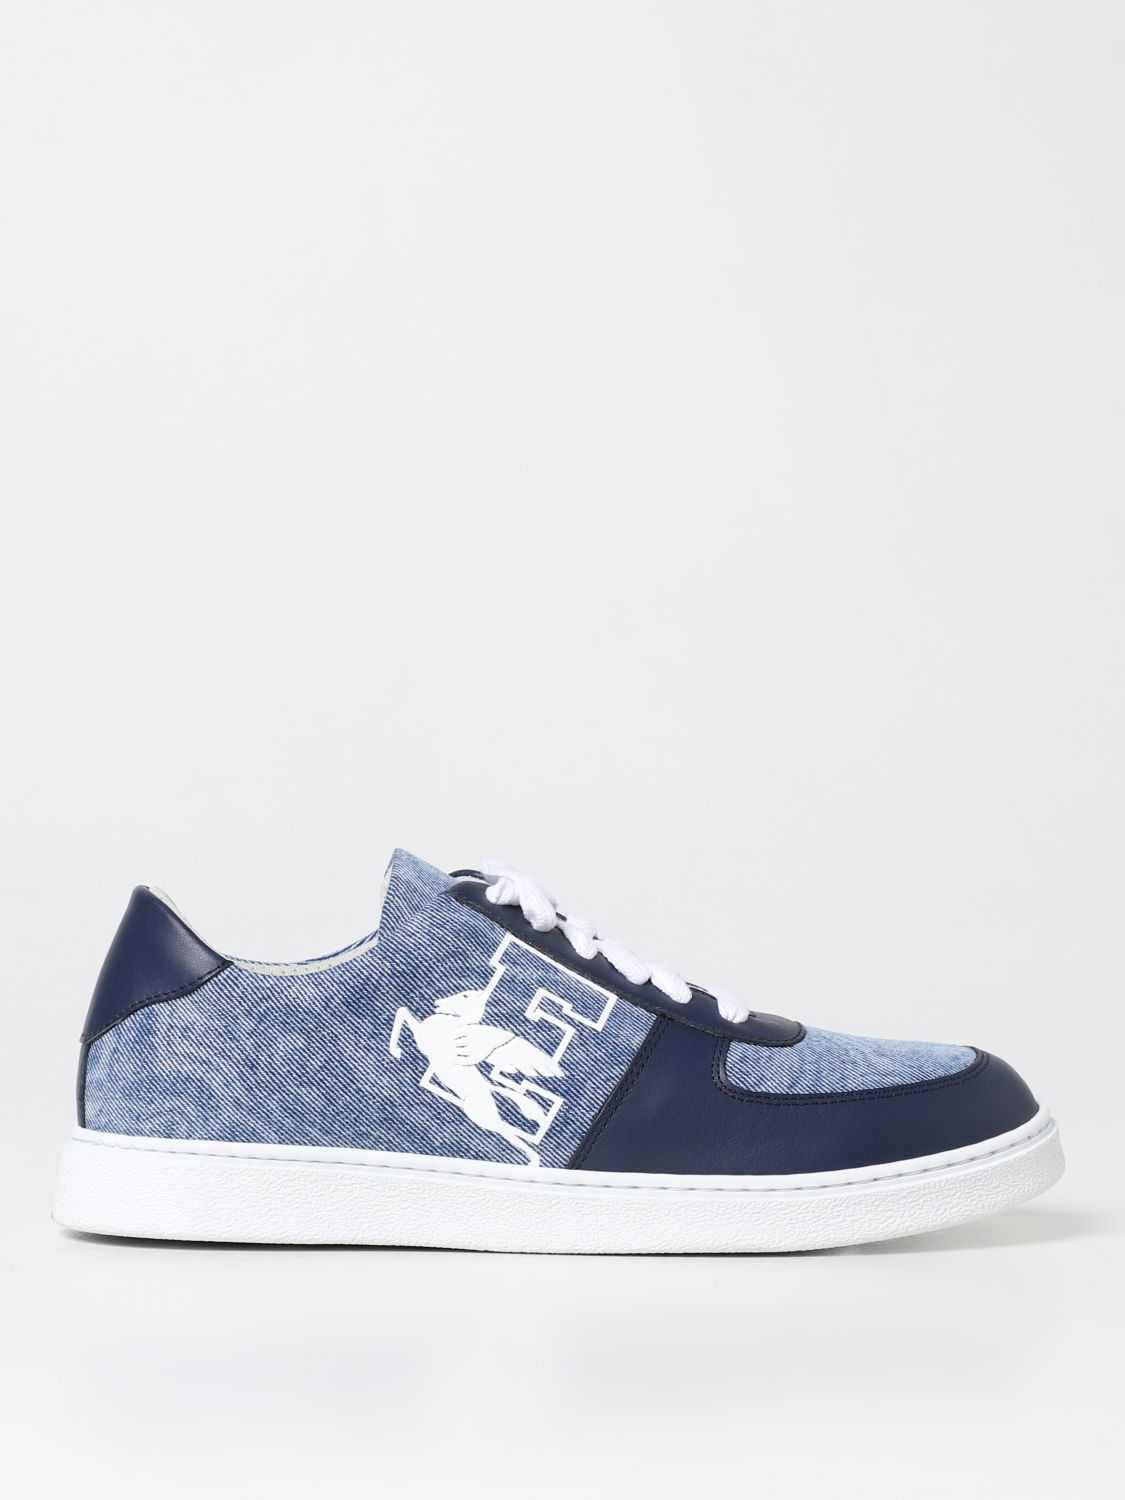 ETRO SNEAKERS IN DENIM AND LEATHER,E32242009